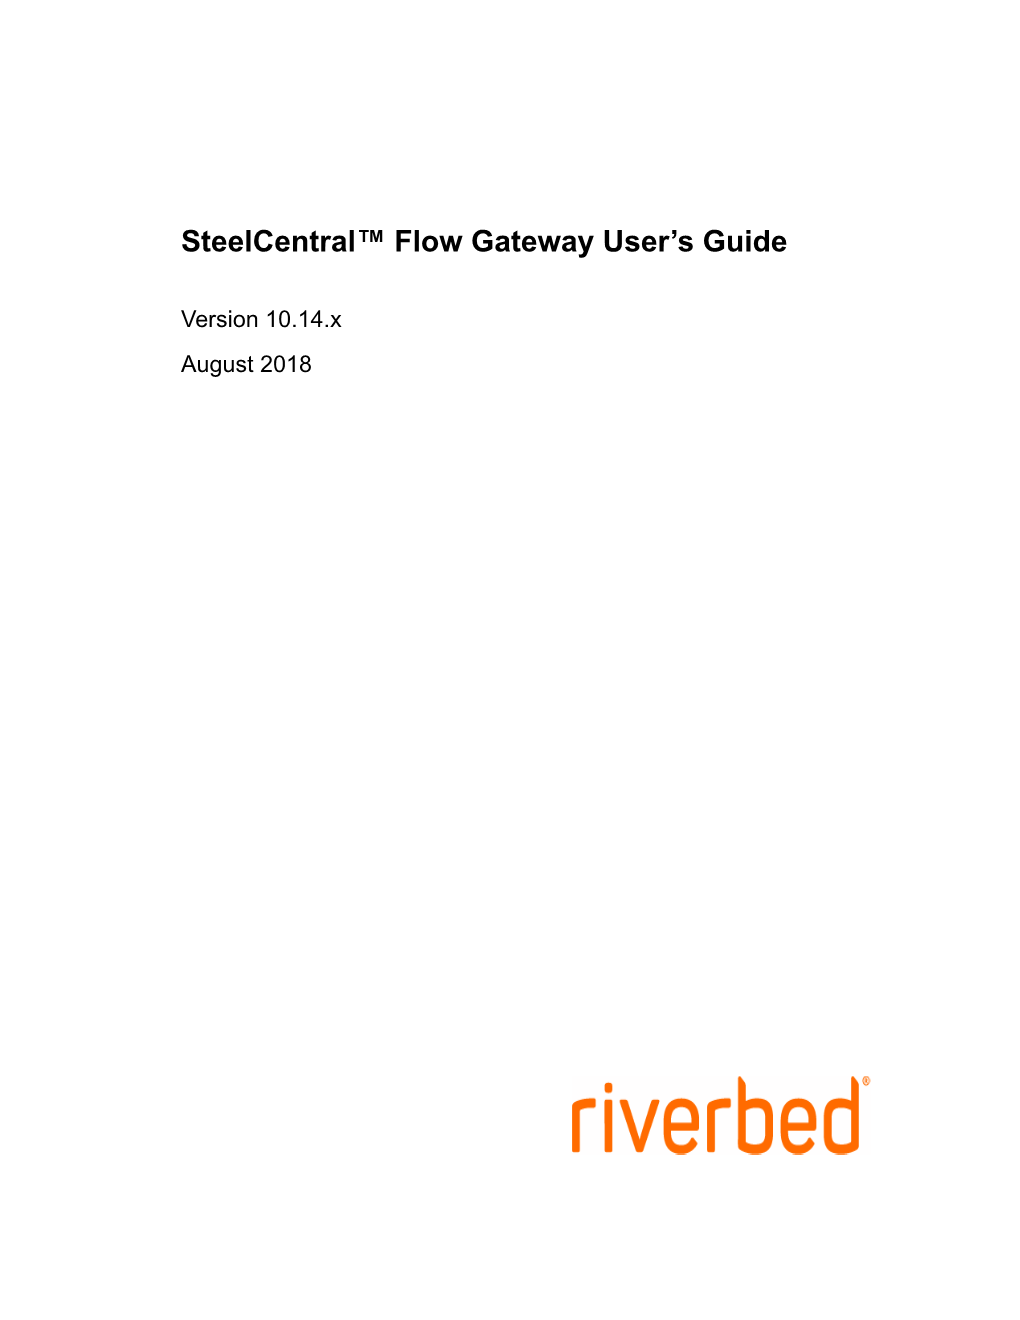 Steelcentral Flow Gateway User's Guide